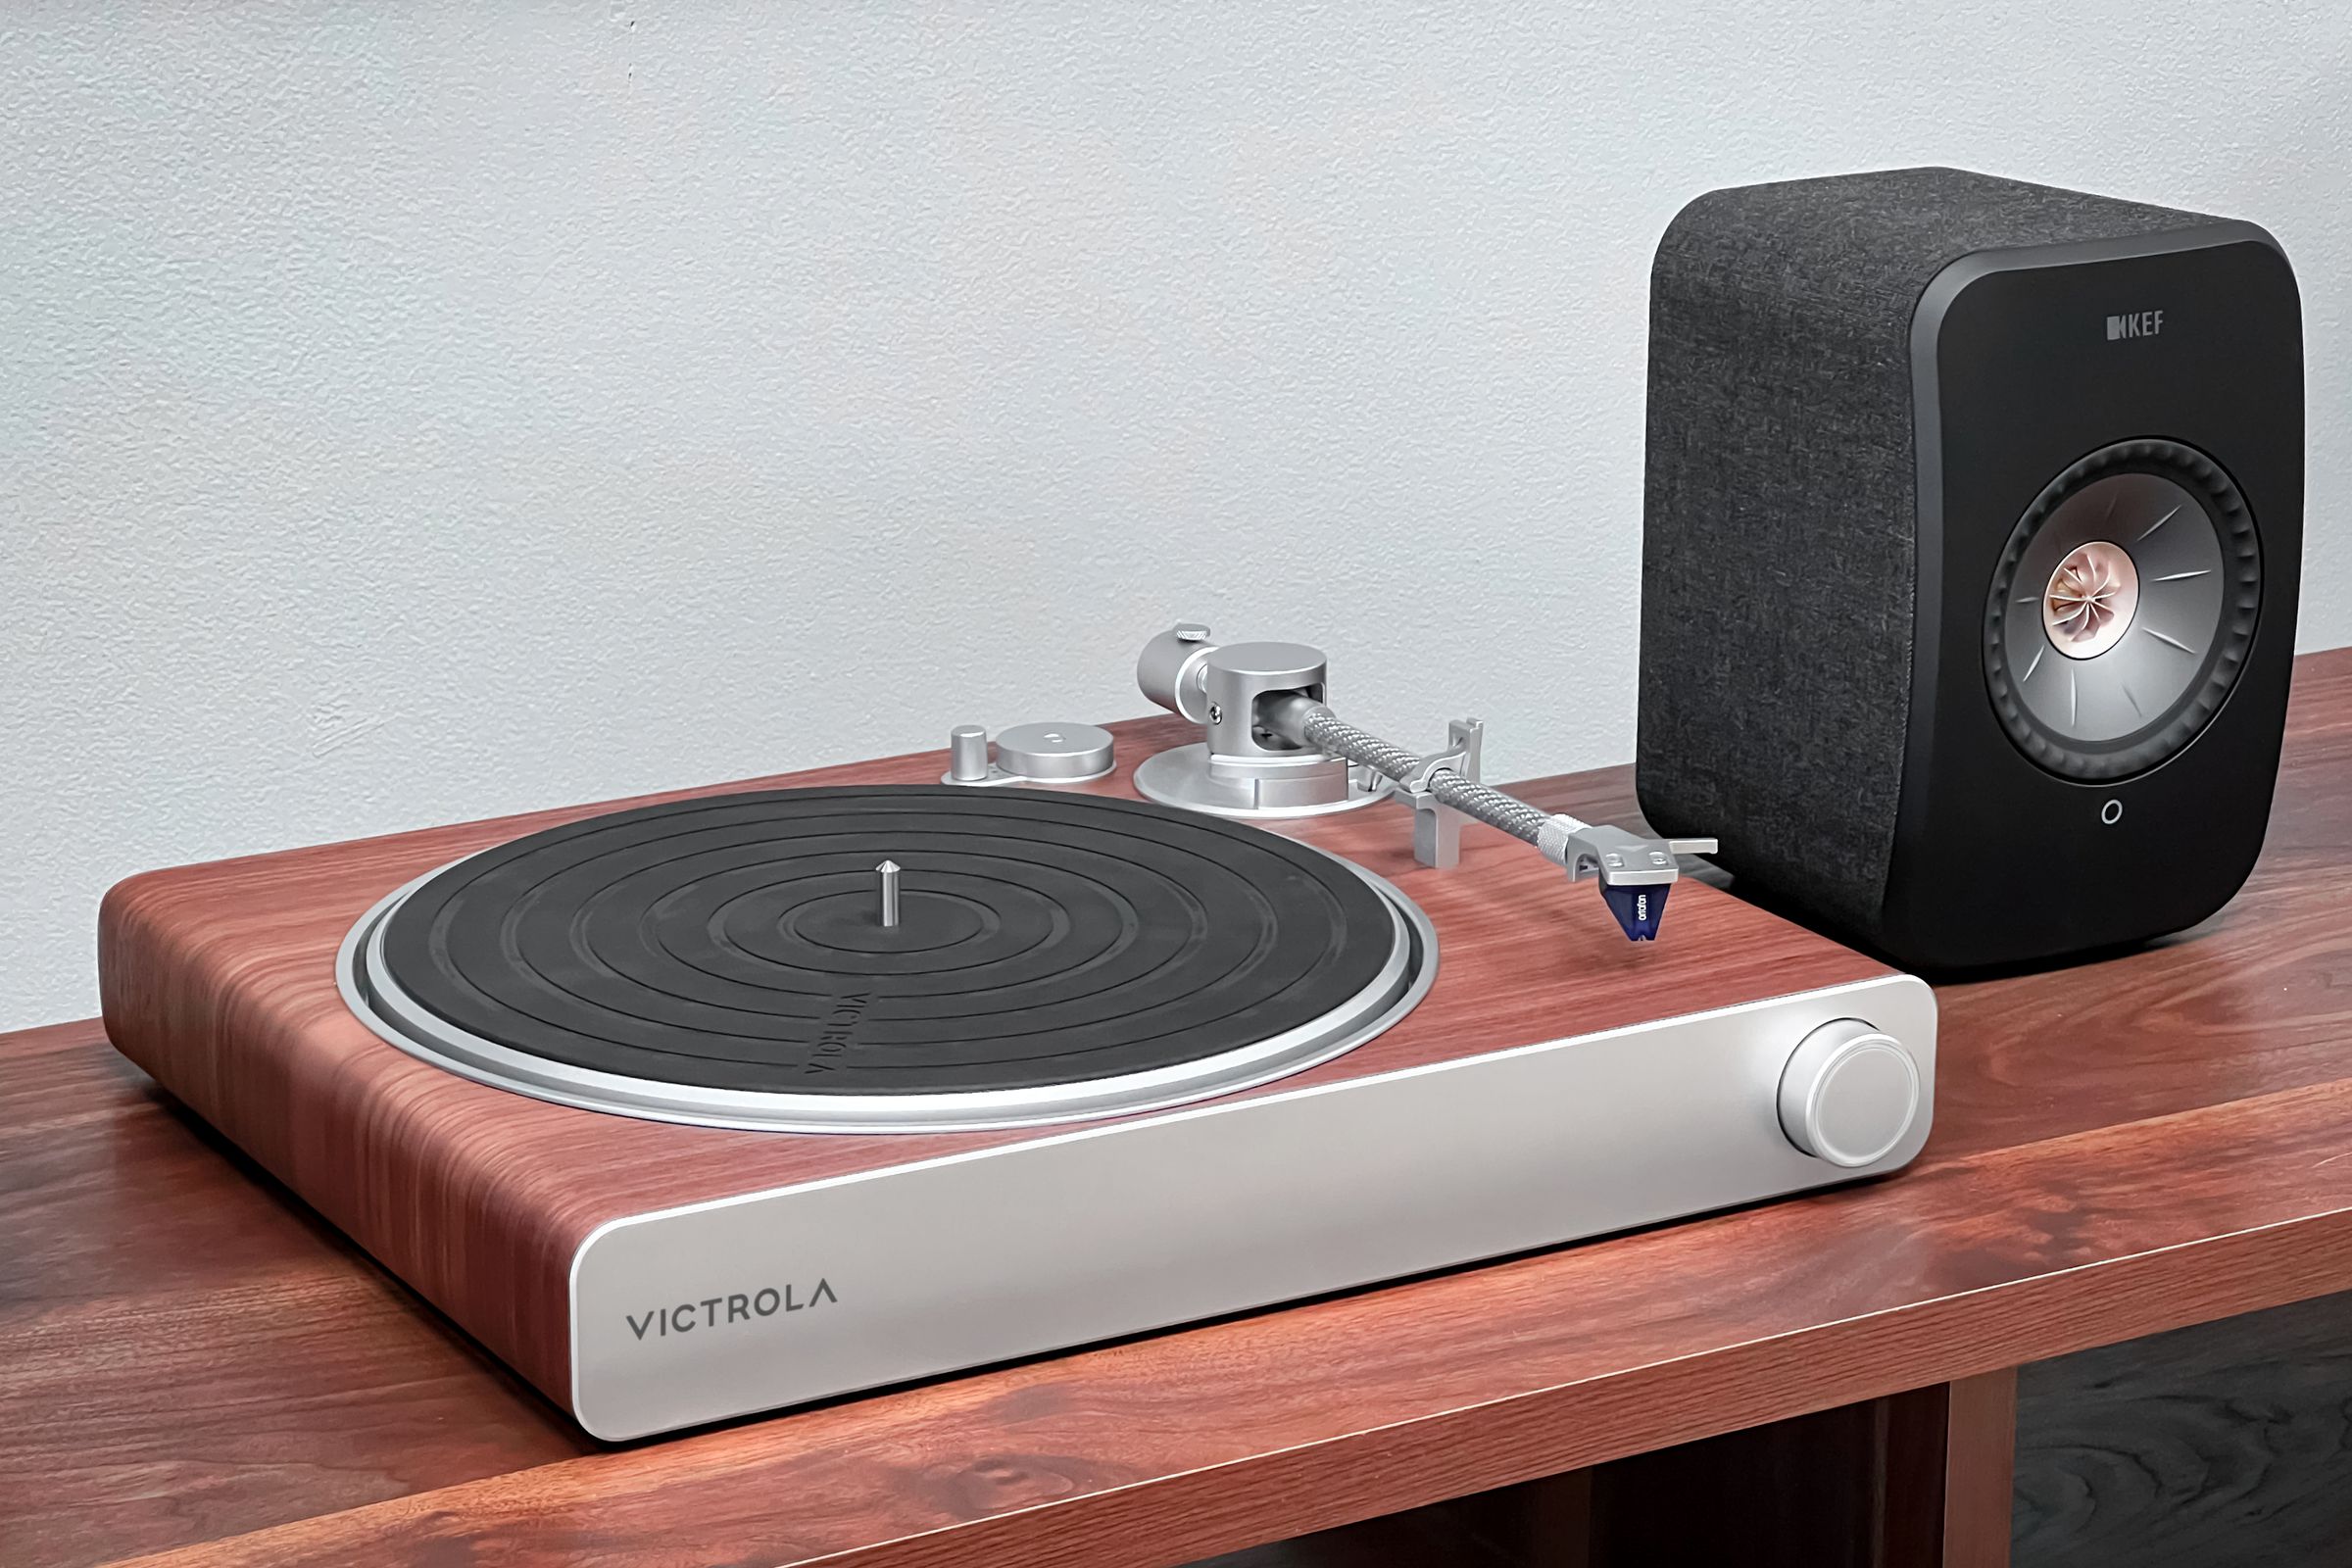 The new wooden Victrola Stream Sapphire turntable resting on a wooden table near a speaker.